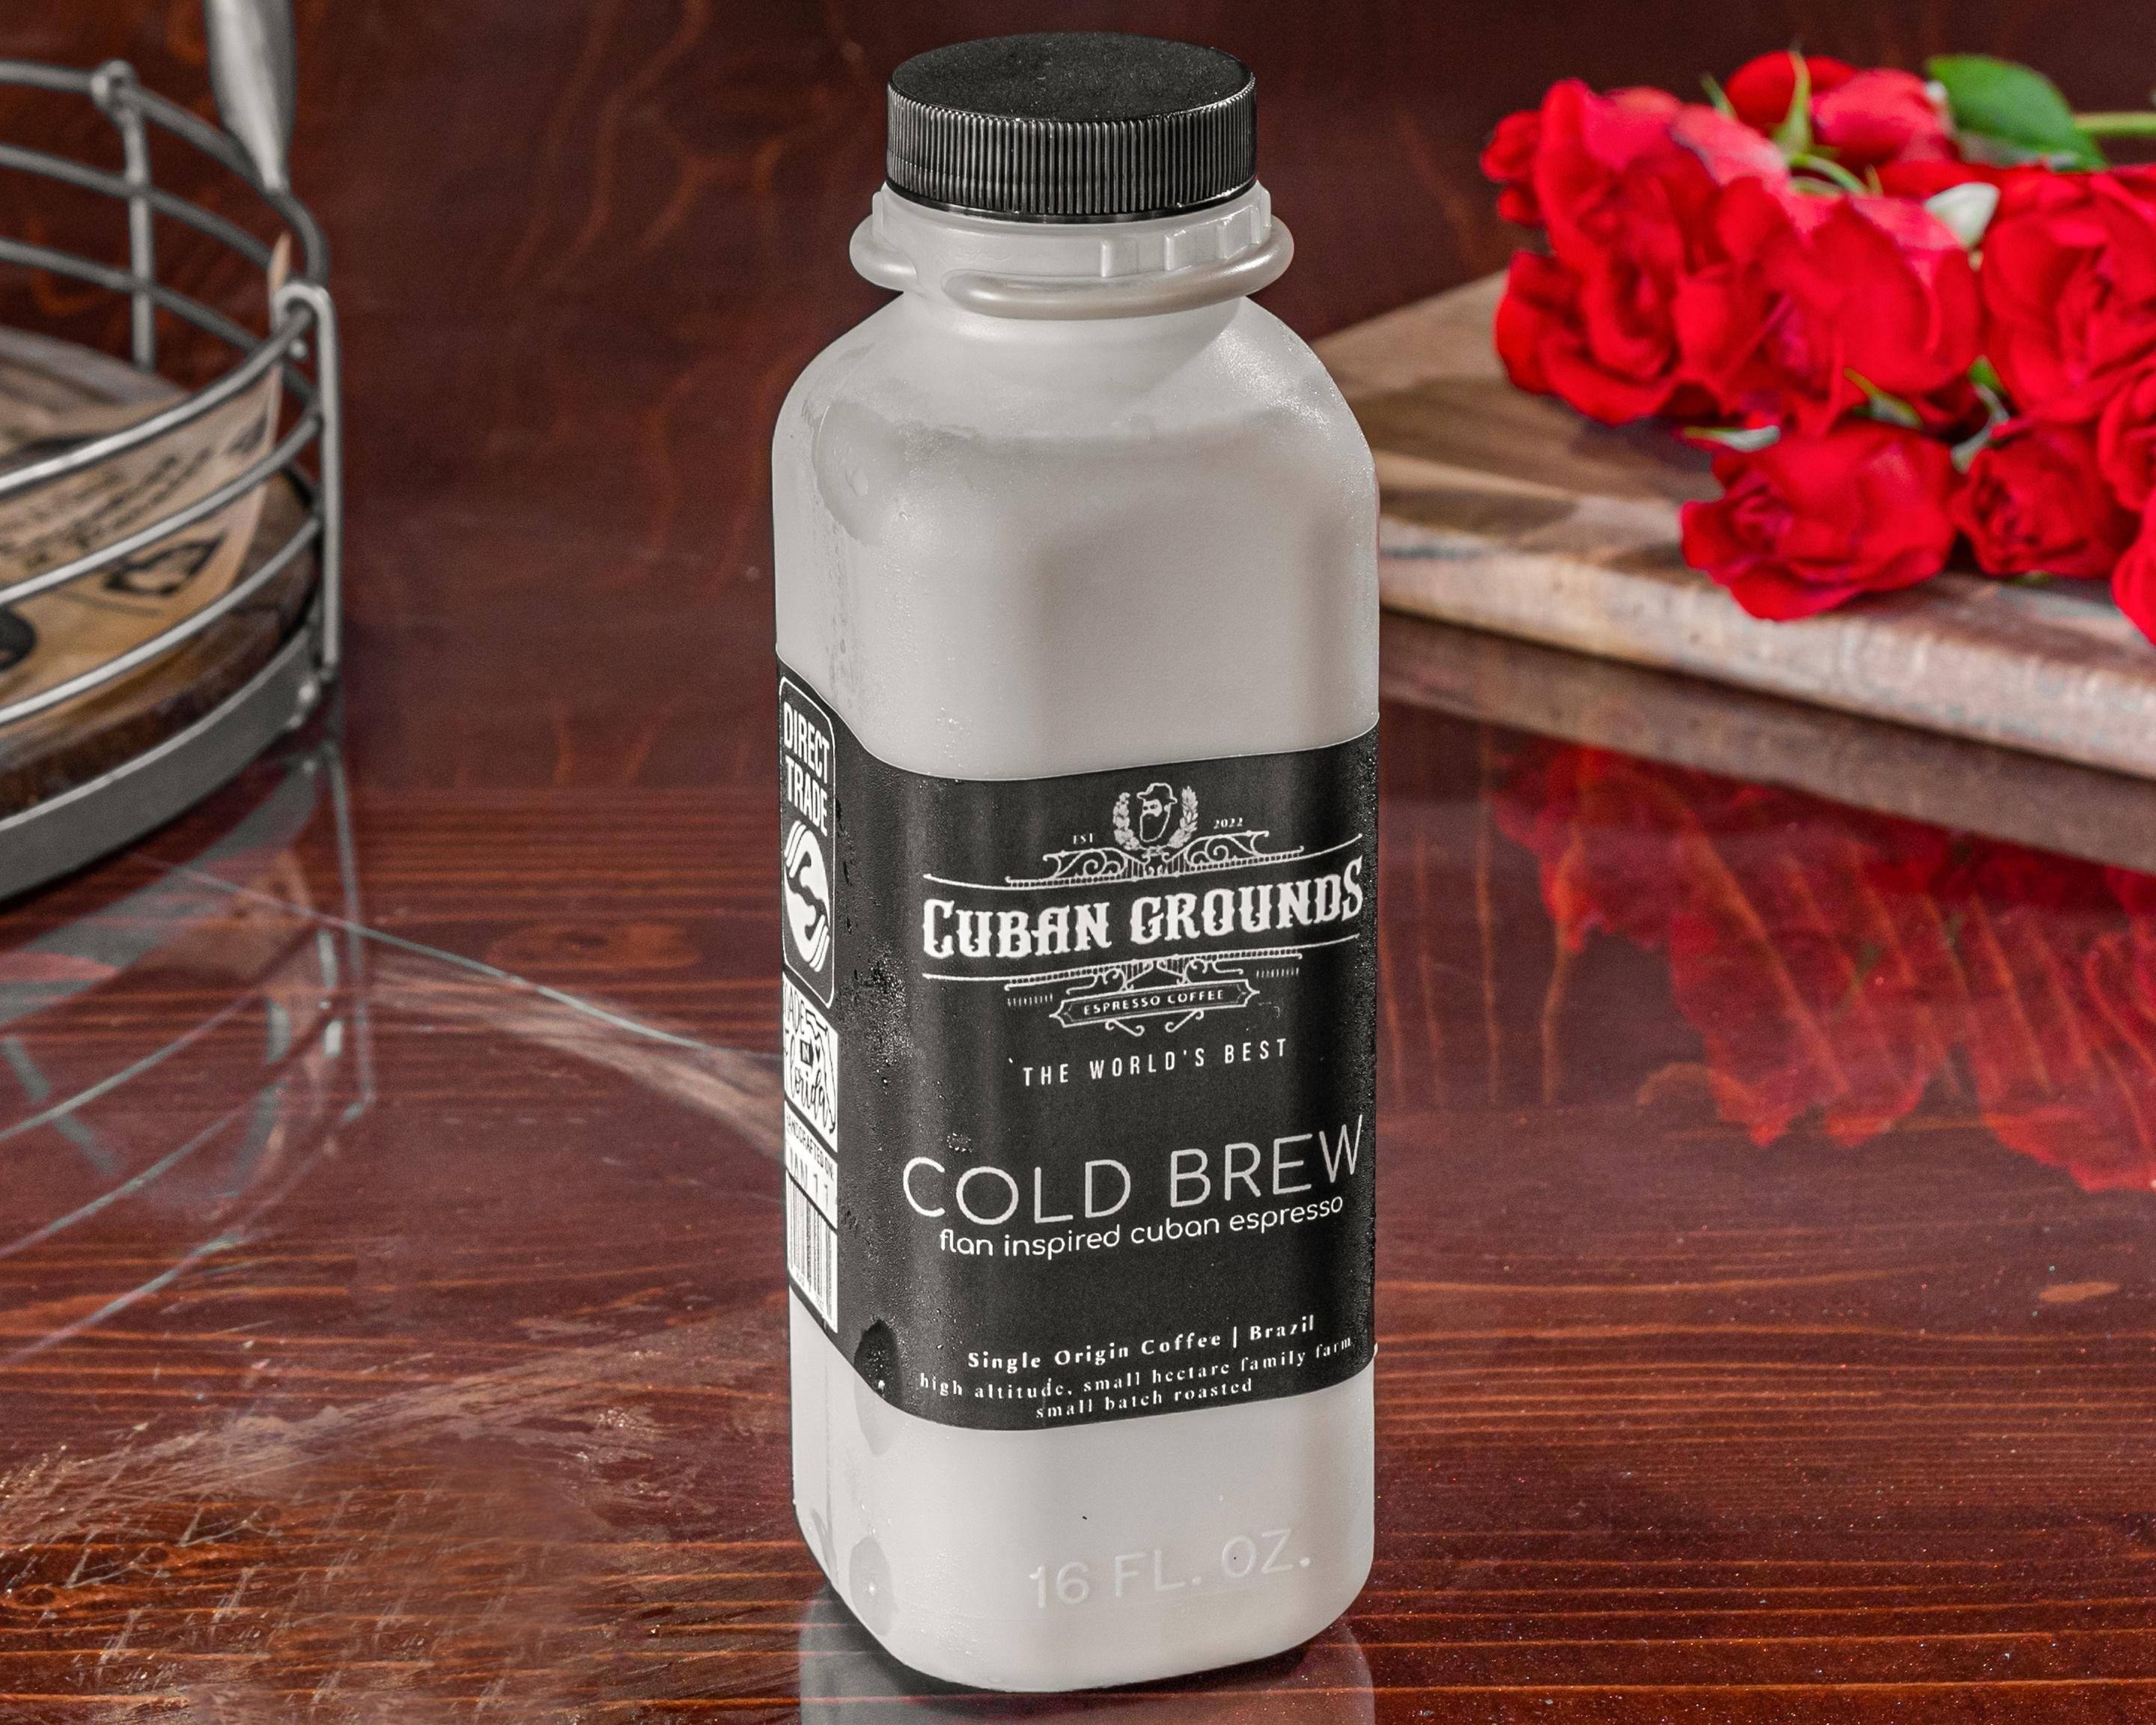 Cuban Grounds Flan-Inspired Cold Brew